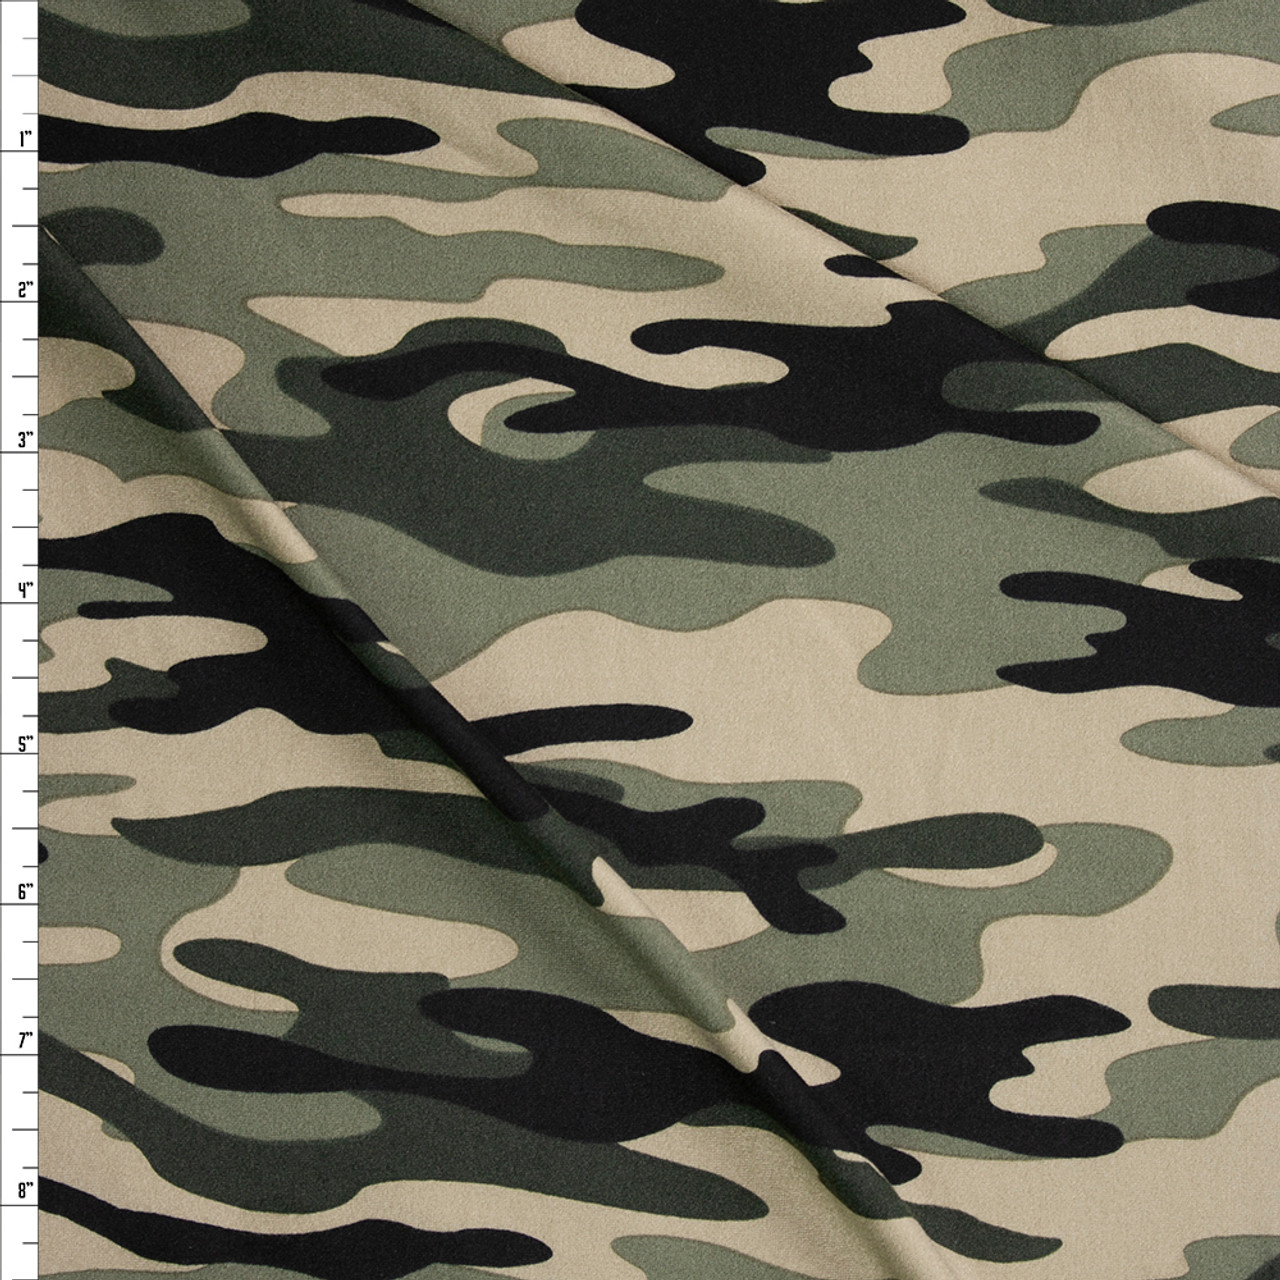 Moss Camo Double Brushed Poly/Spandex Knit